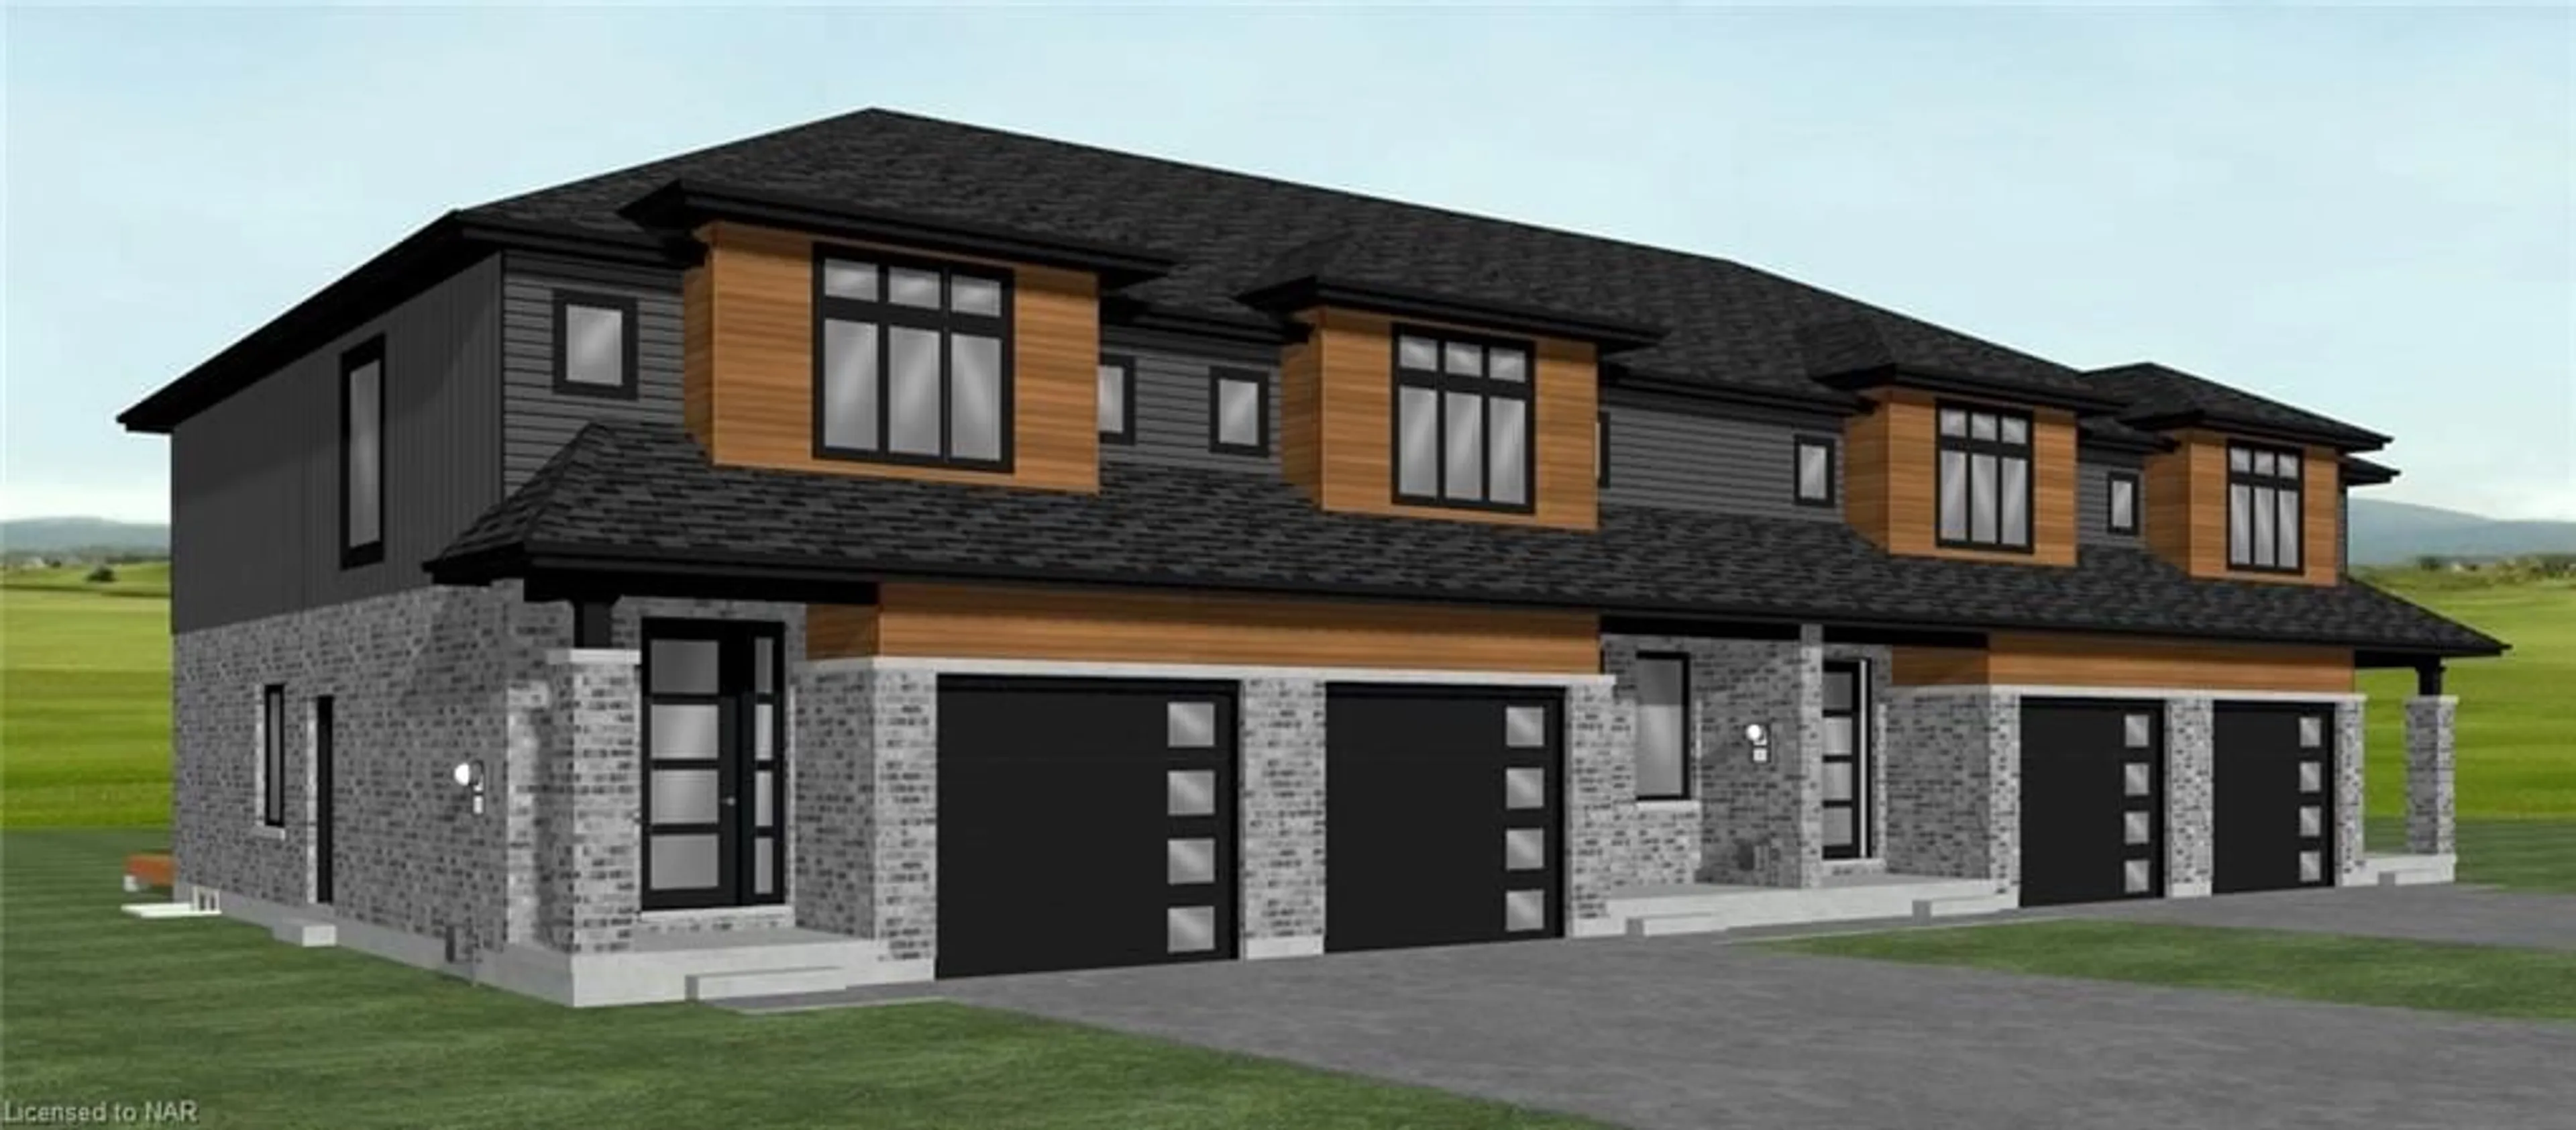 Home with brick exterior material for 7429-7453 Matteo Dr #4, Niagara Falls Ontario L2H 3T3